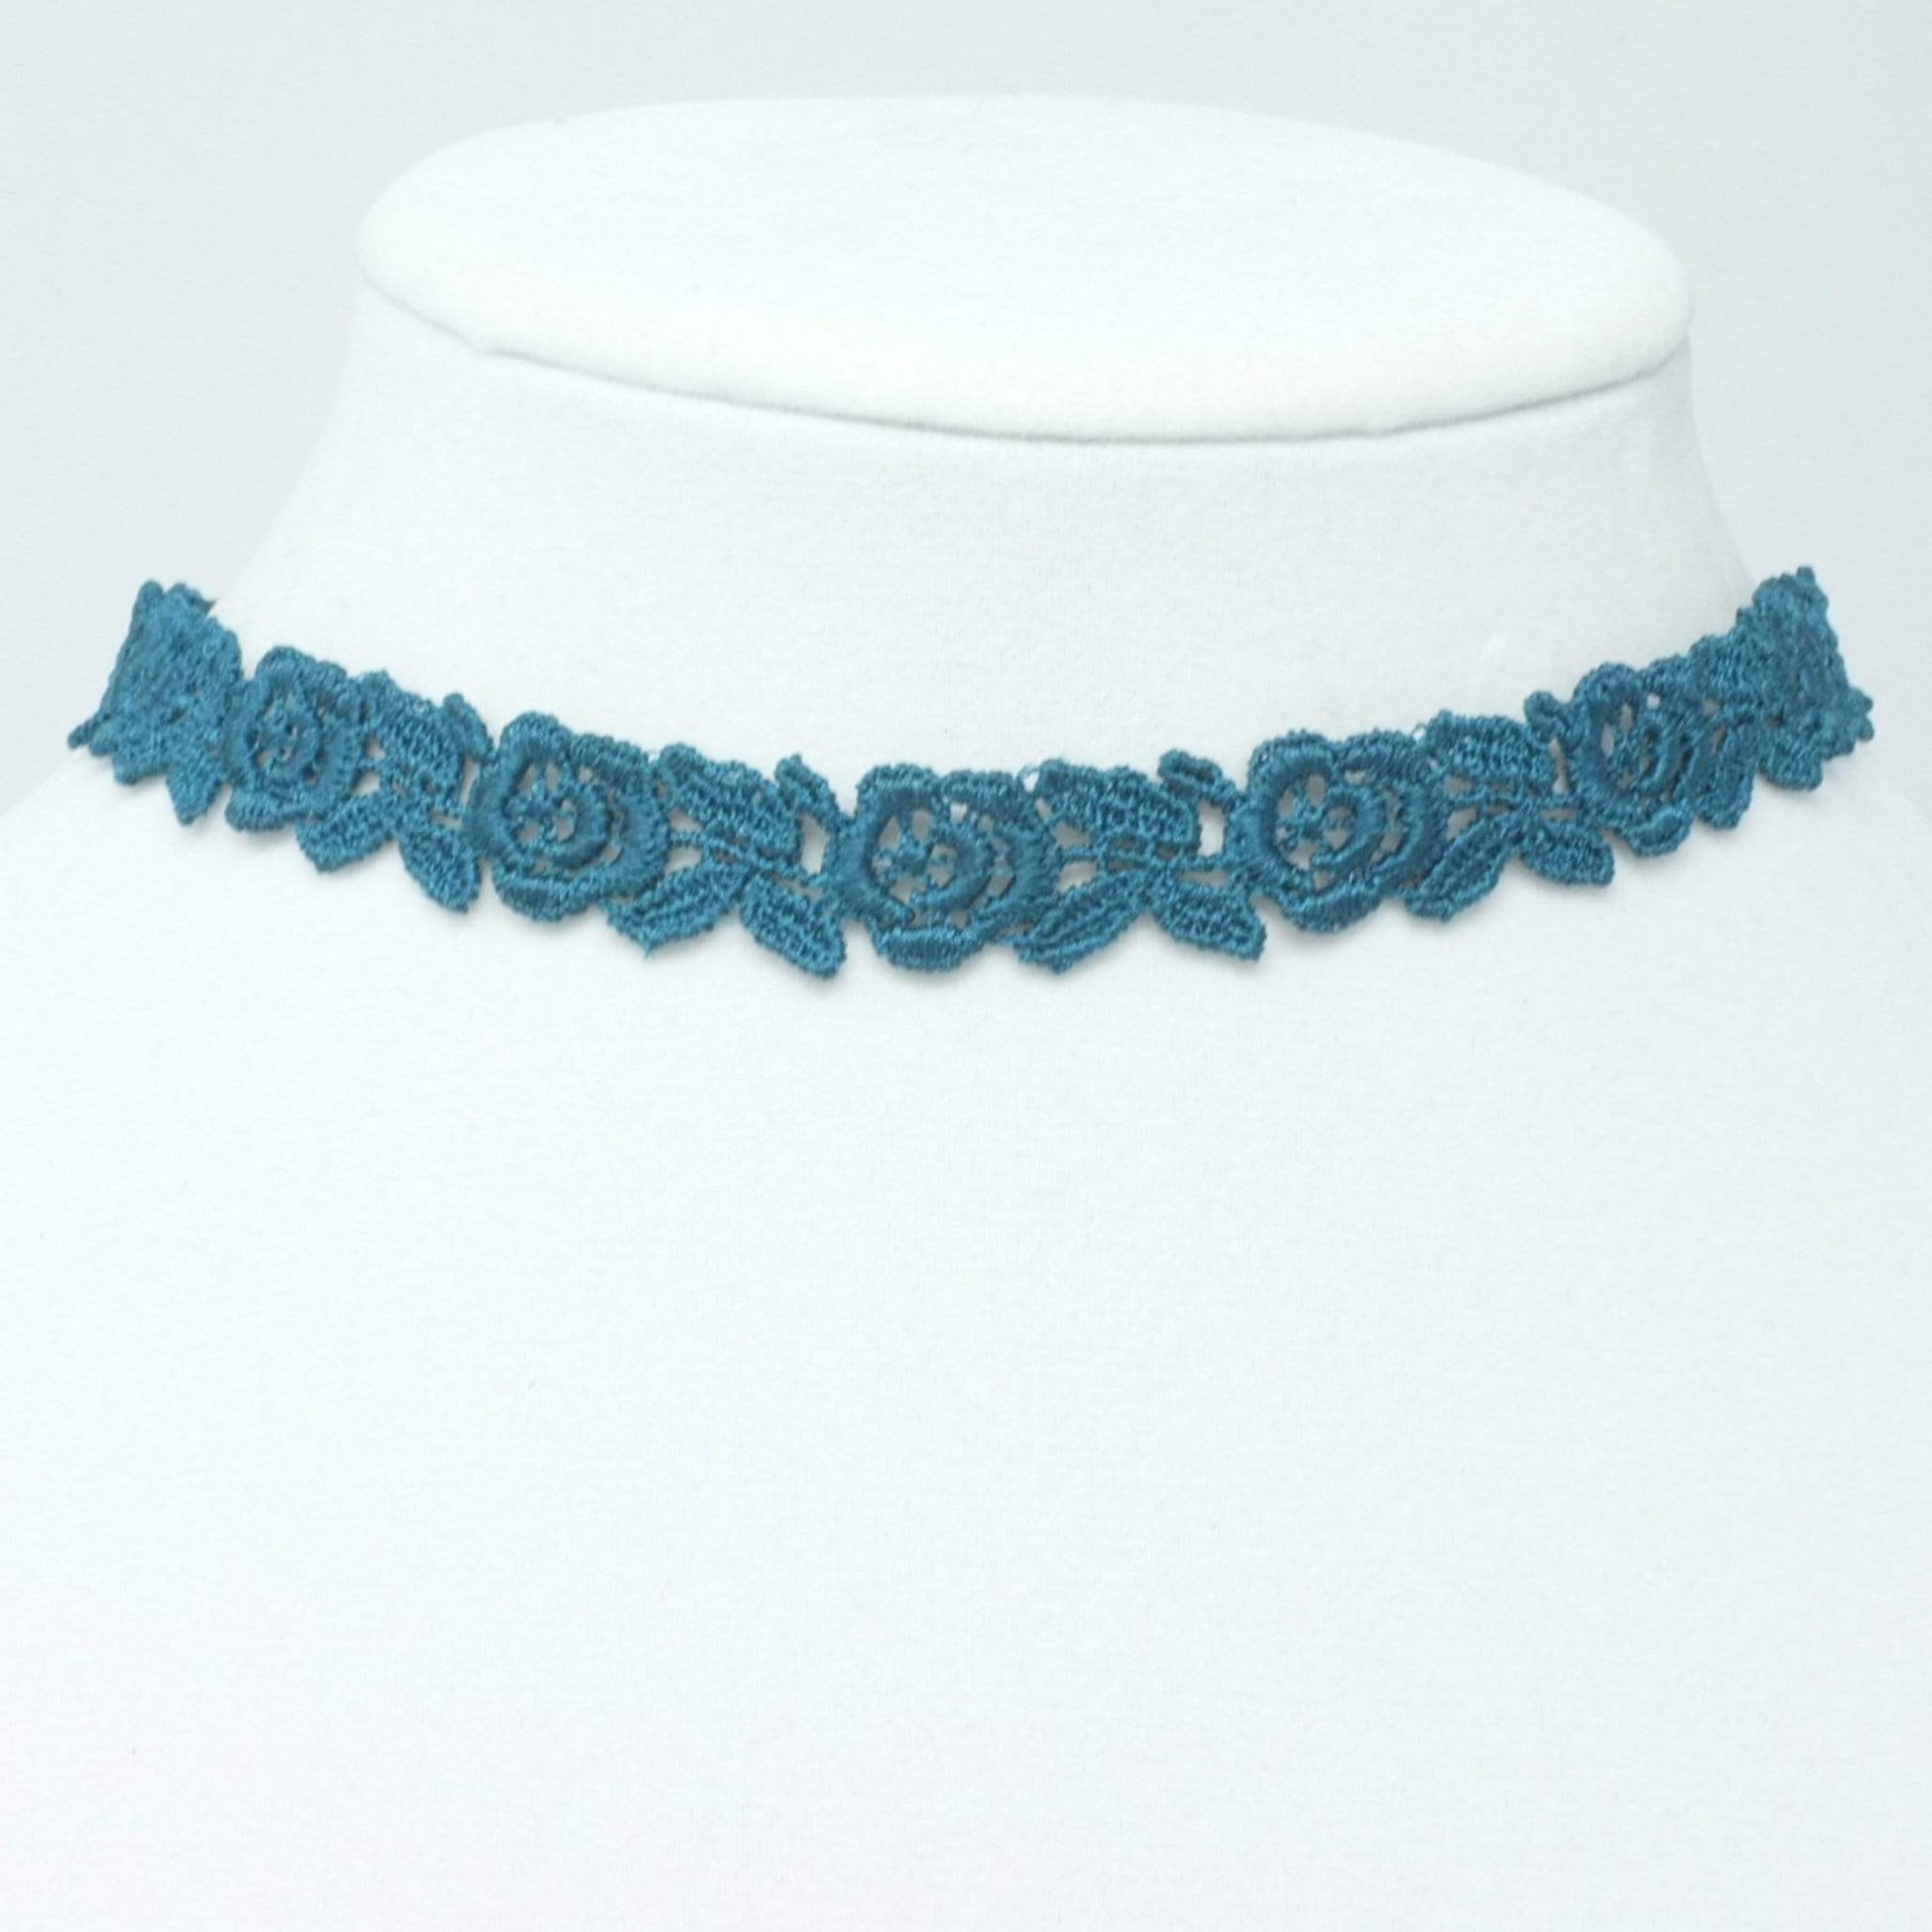 Lace choker necklace with teal rose pattern.